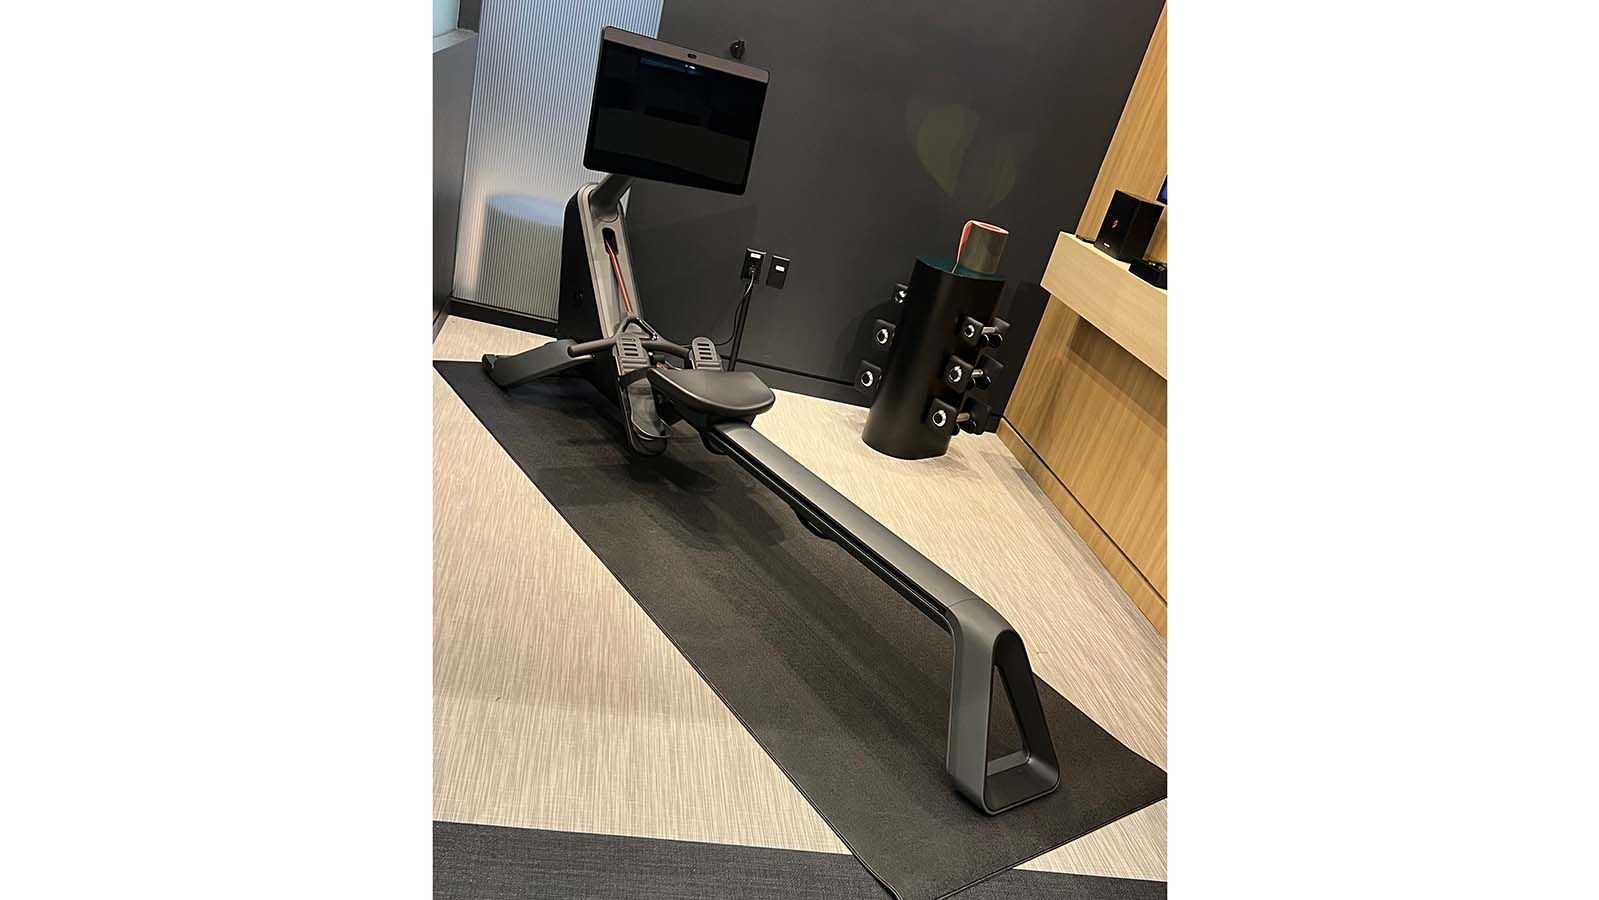 Peloton Row hands-on: Here's what it's like to use this $3,195